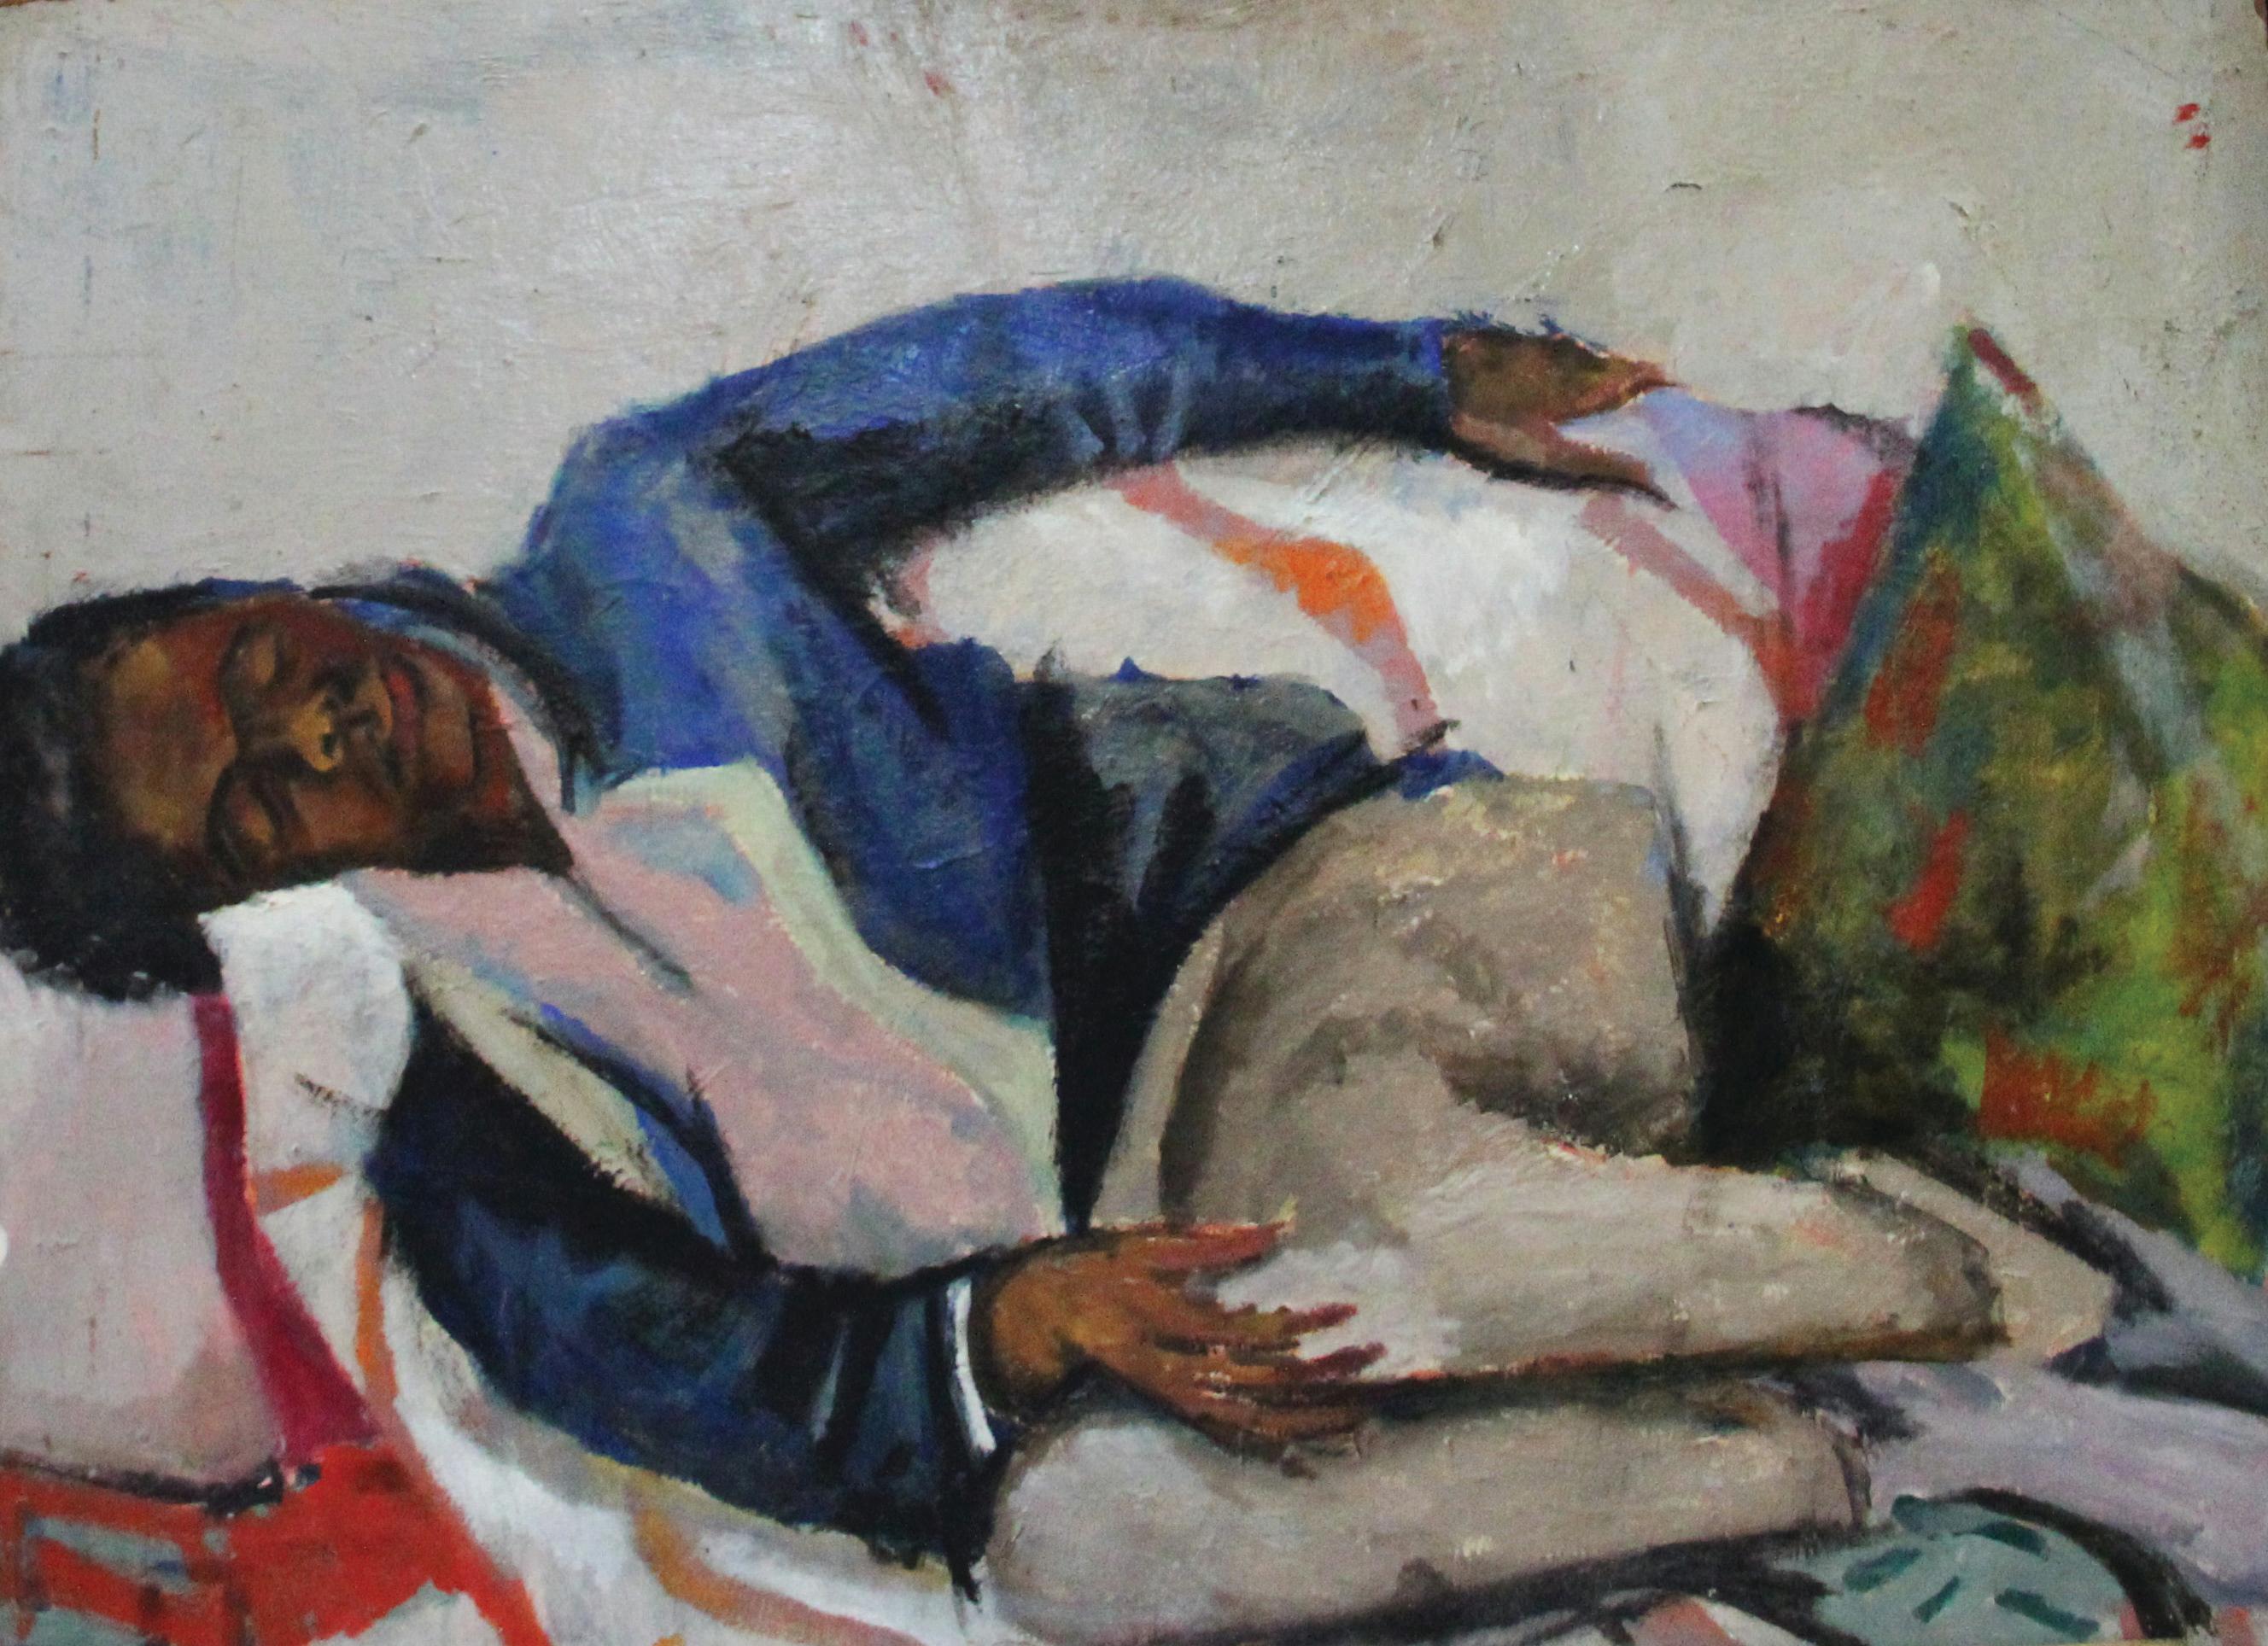 Resting, Expressionist Portrait of Young Man by Philadelphia Artist